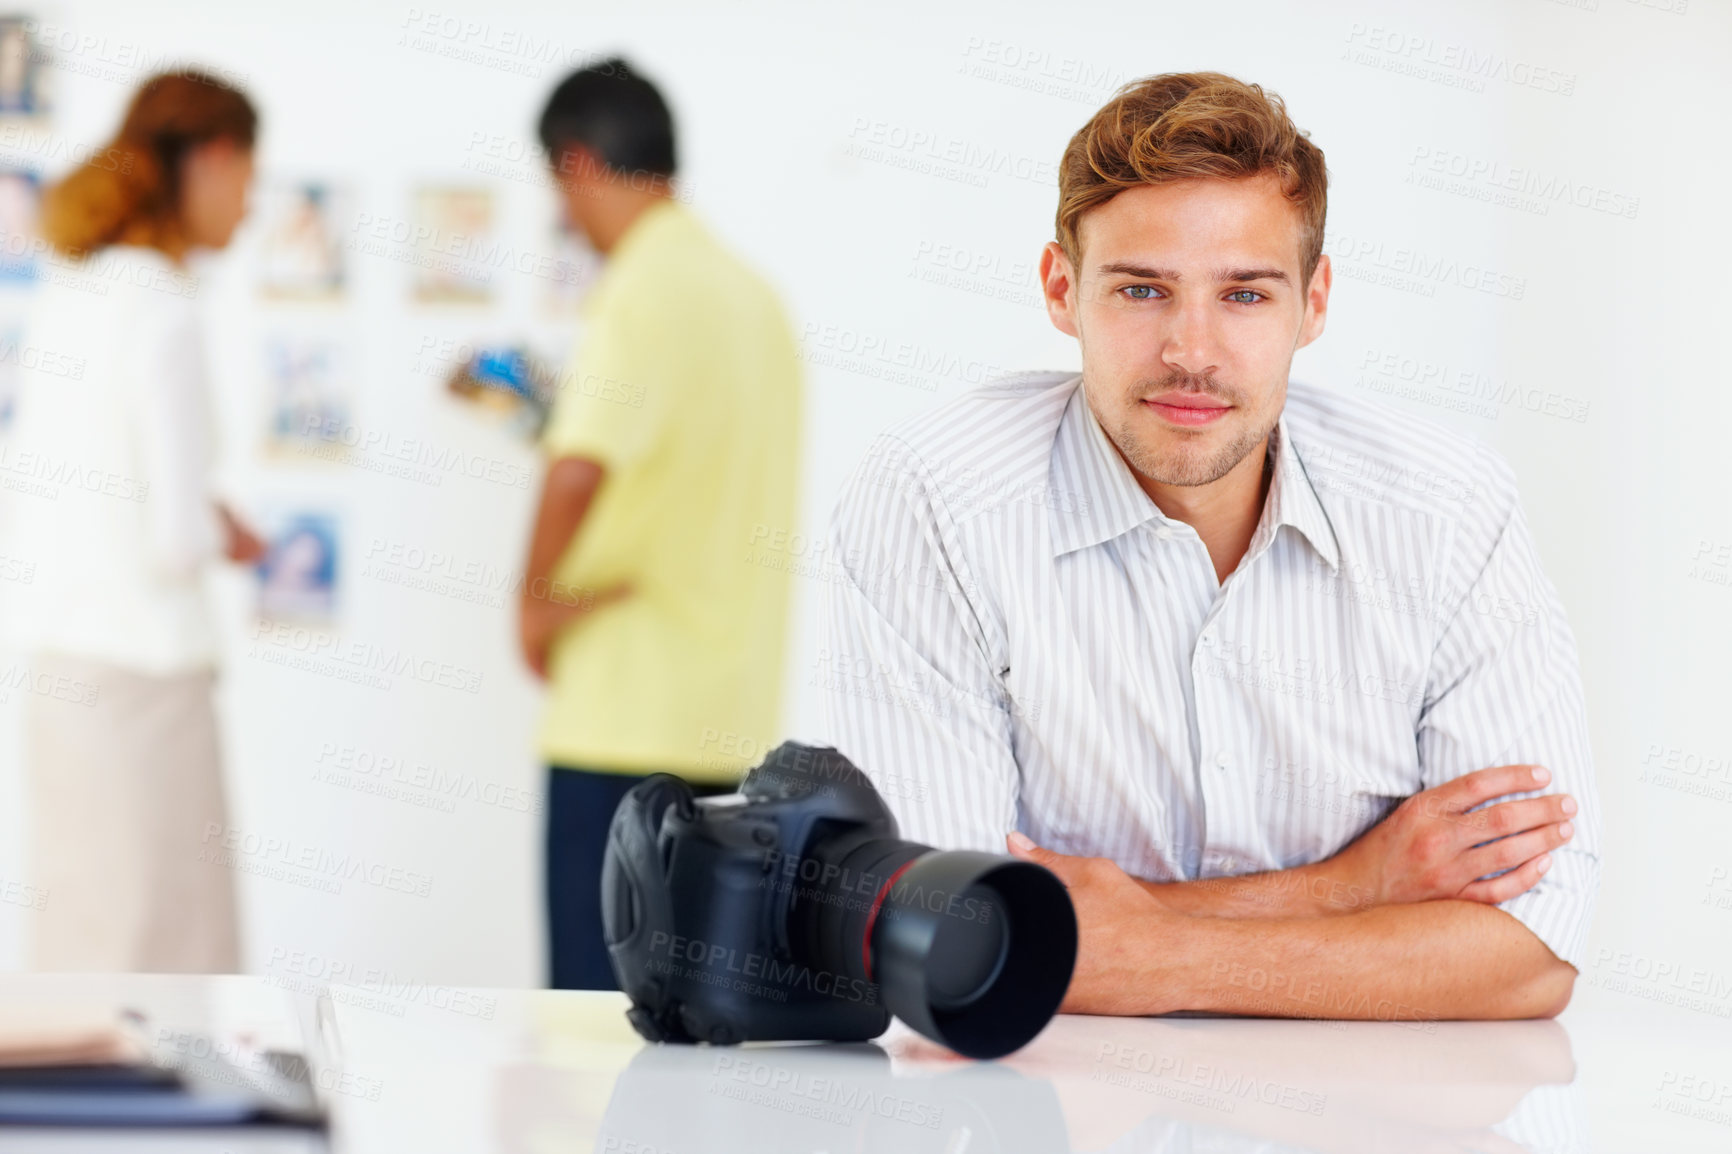 Buy stock photo Portrait of young professional photographer with people looking at images in background